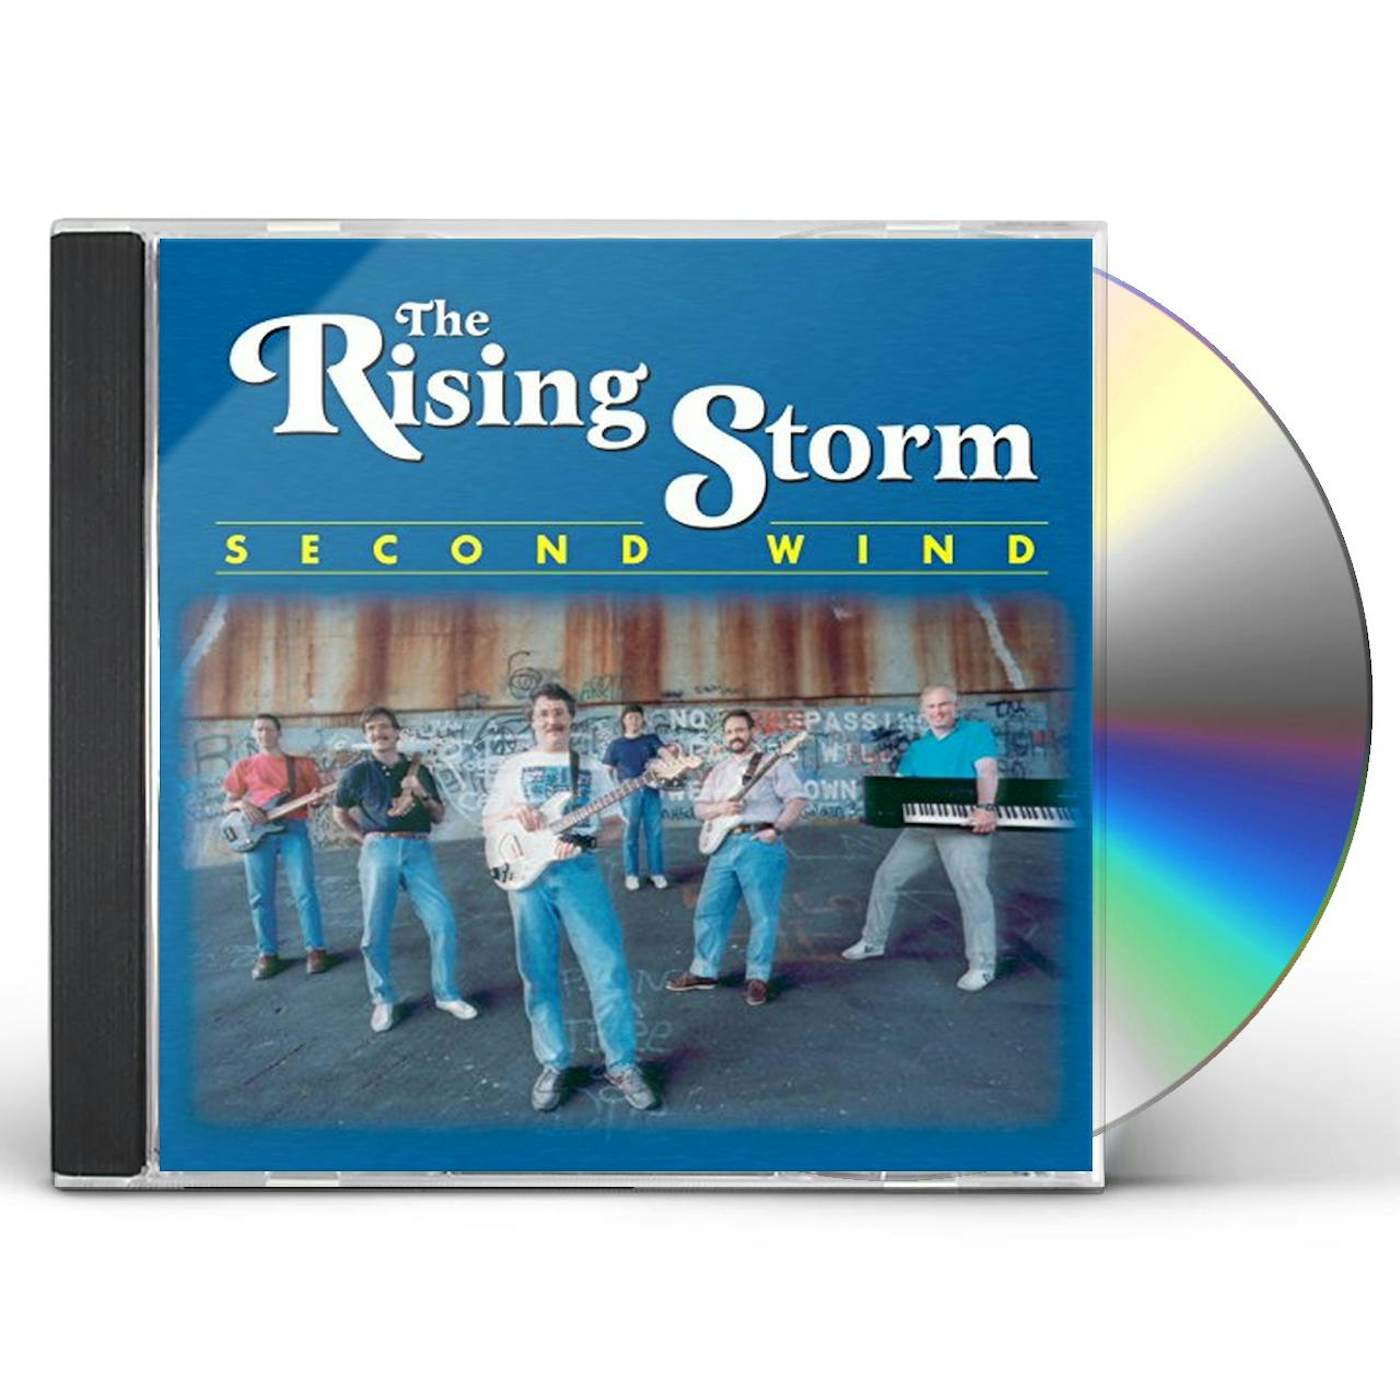 The Rising Storm SECOND WIND CD